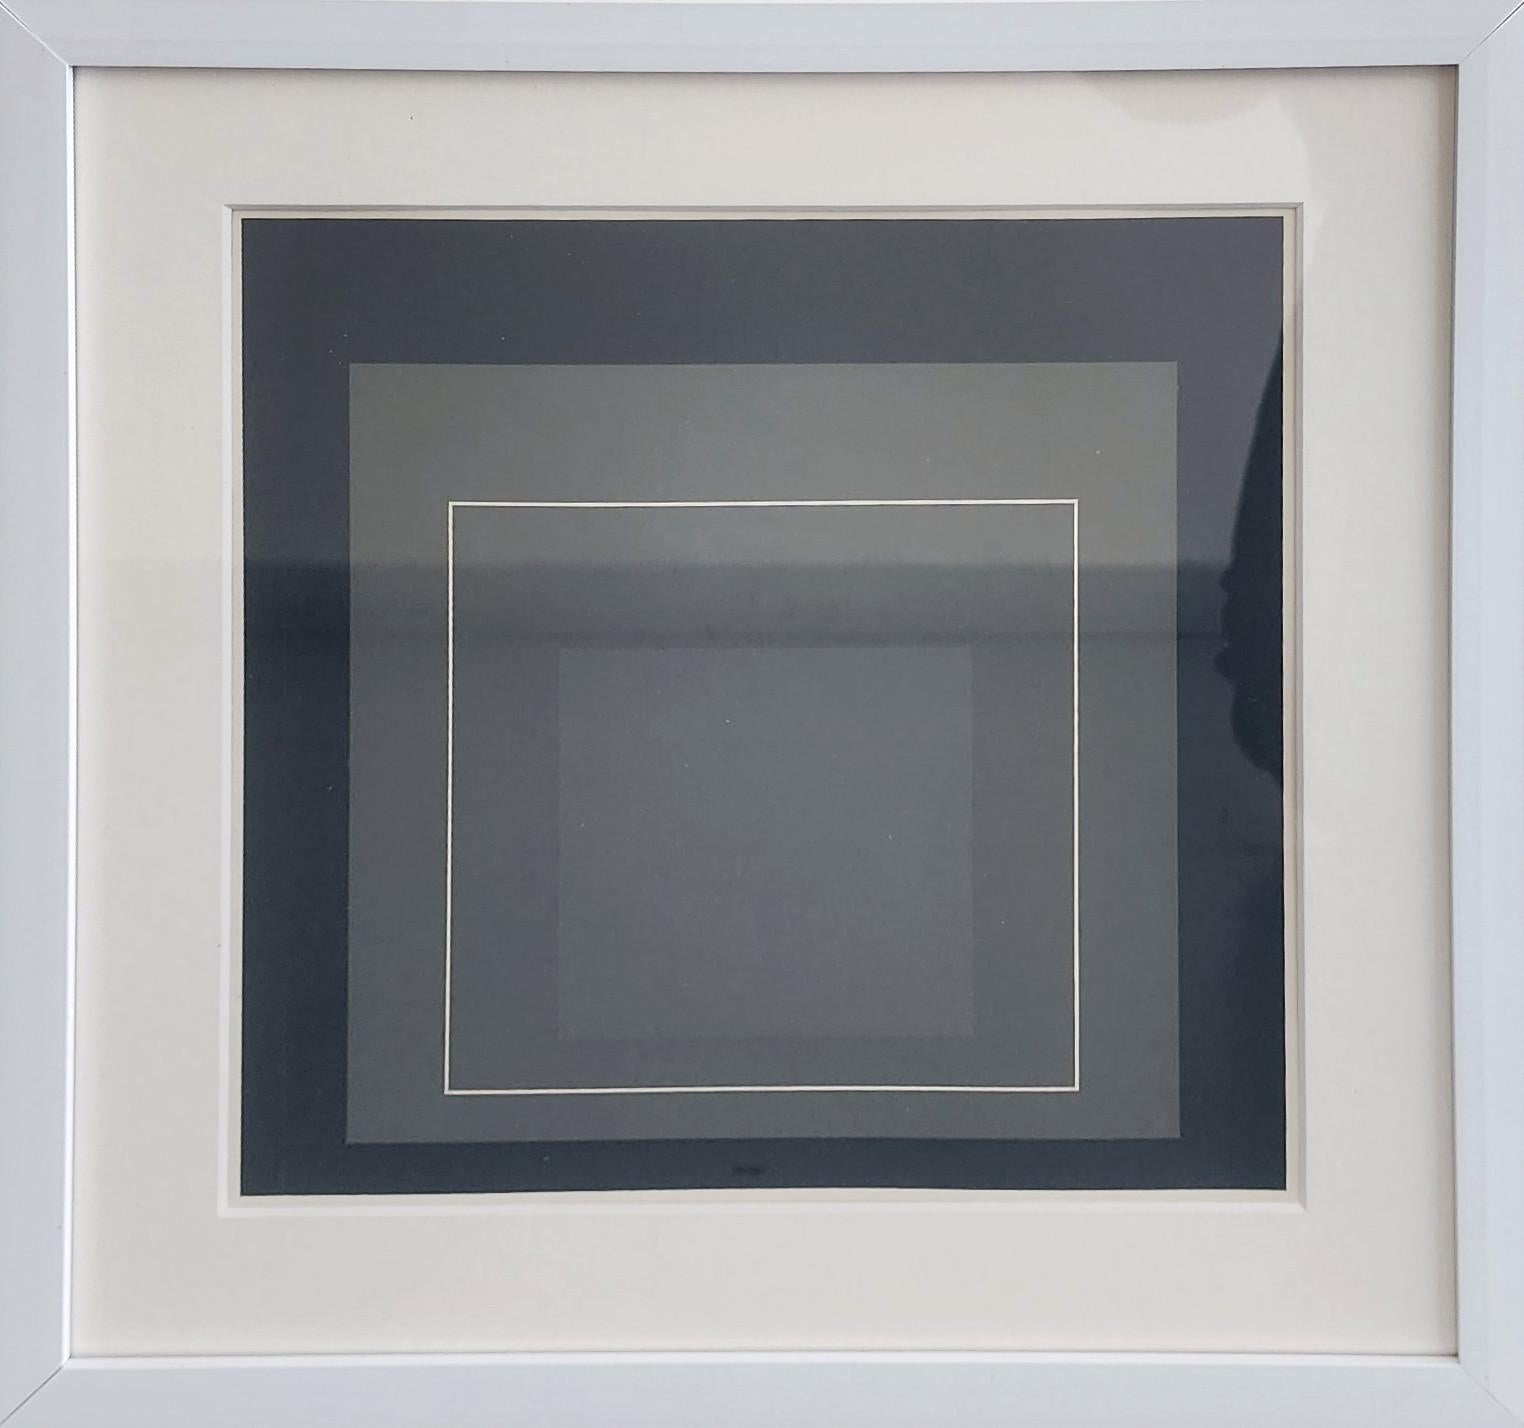 Homage to the Square (Hommage au Carre)  (Bauhaus, Geometric Abstraction) - Print by (after) Josef Albers